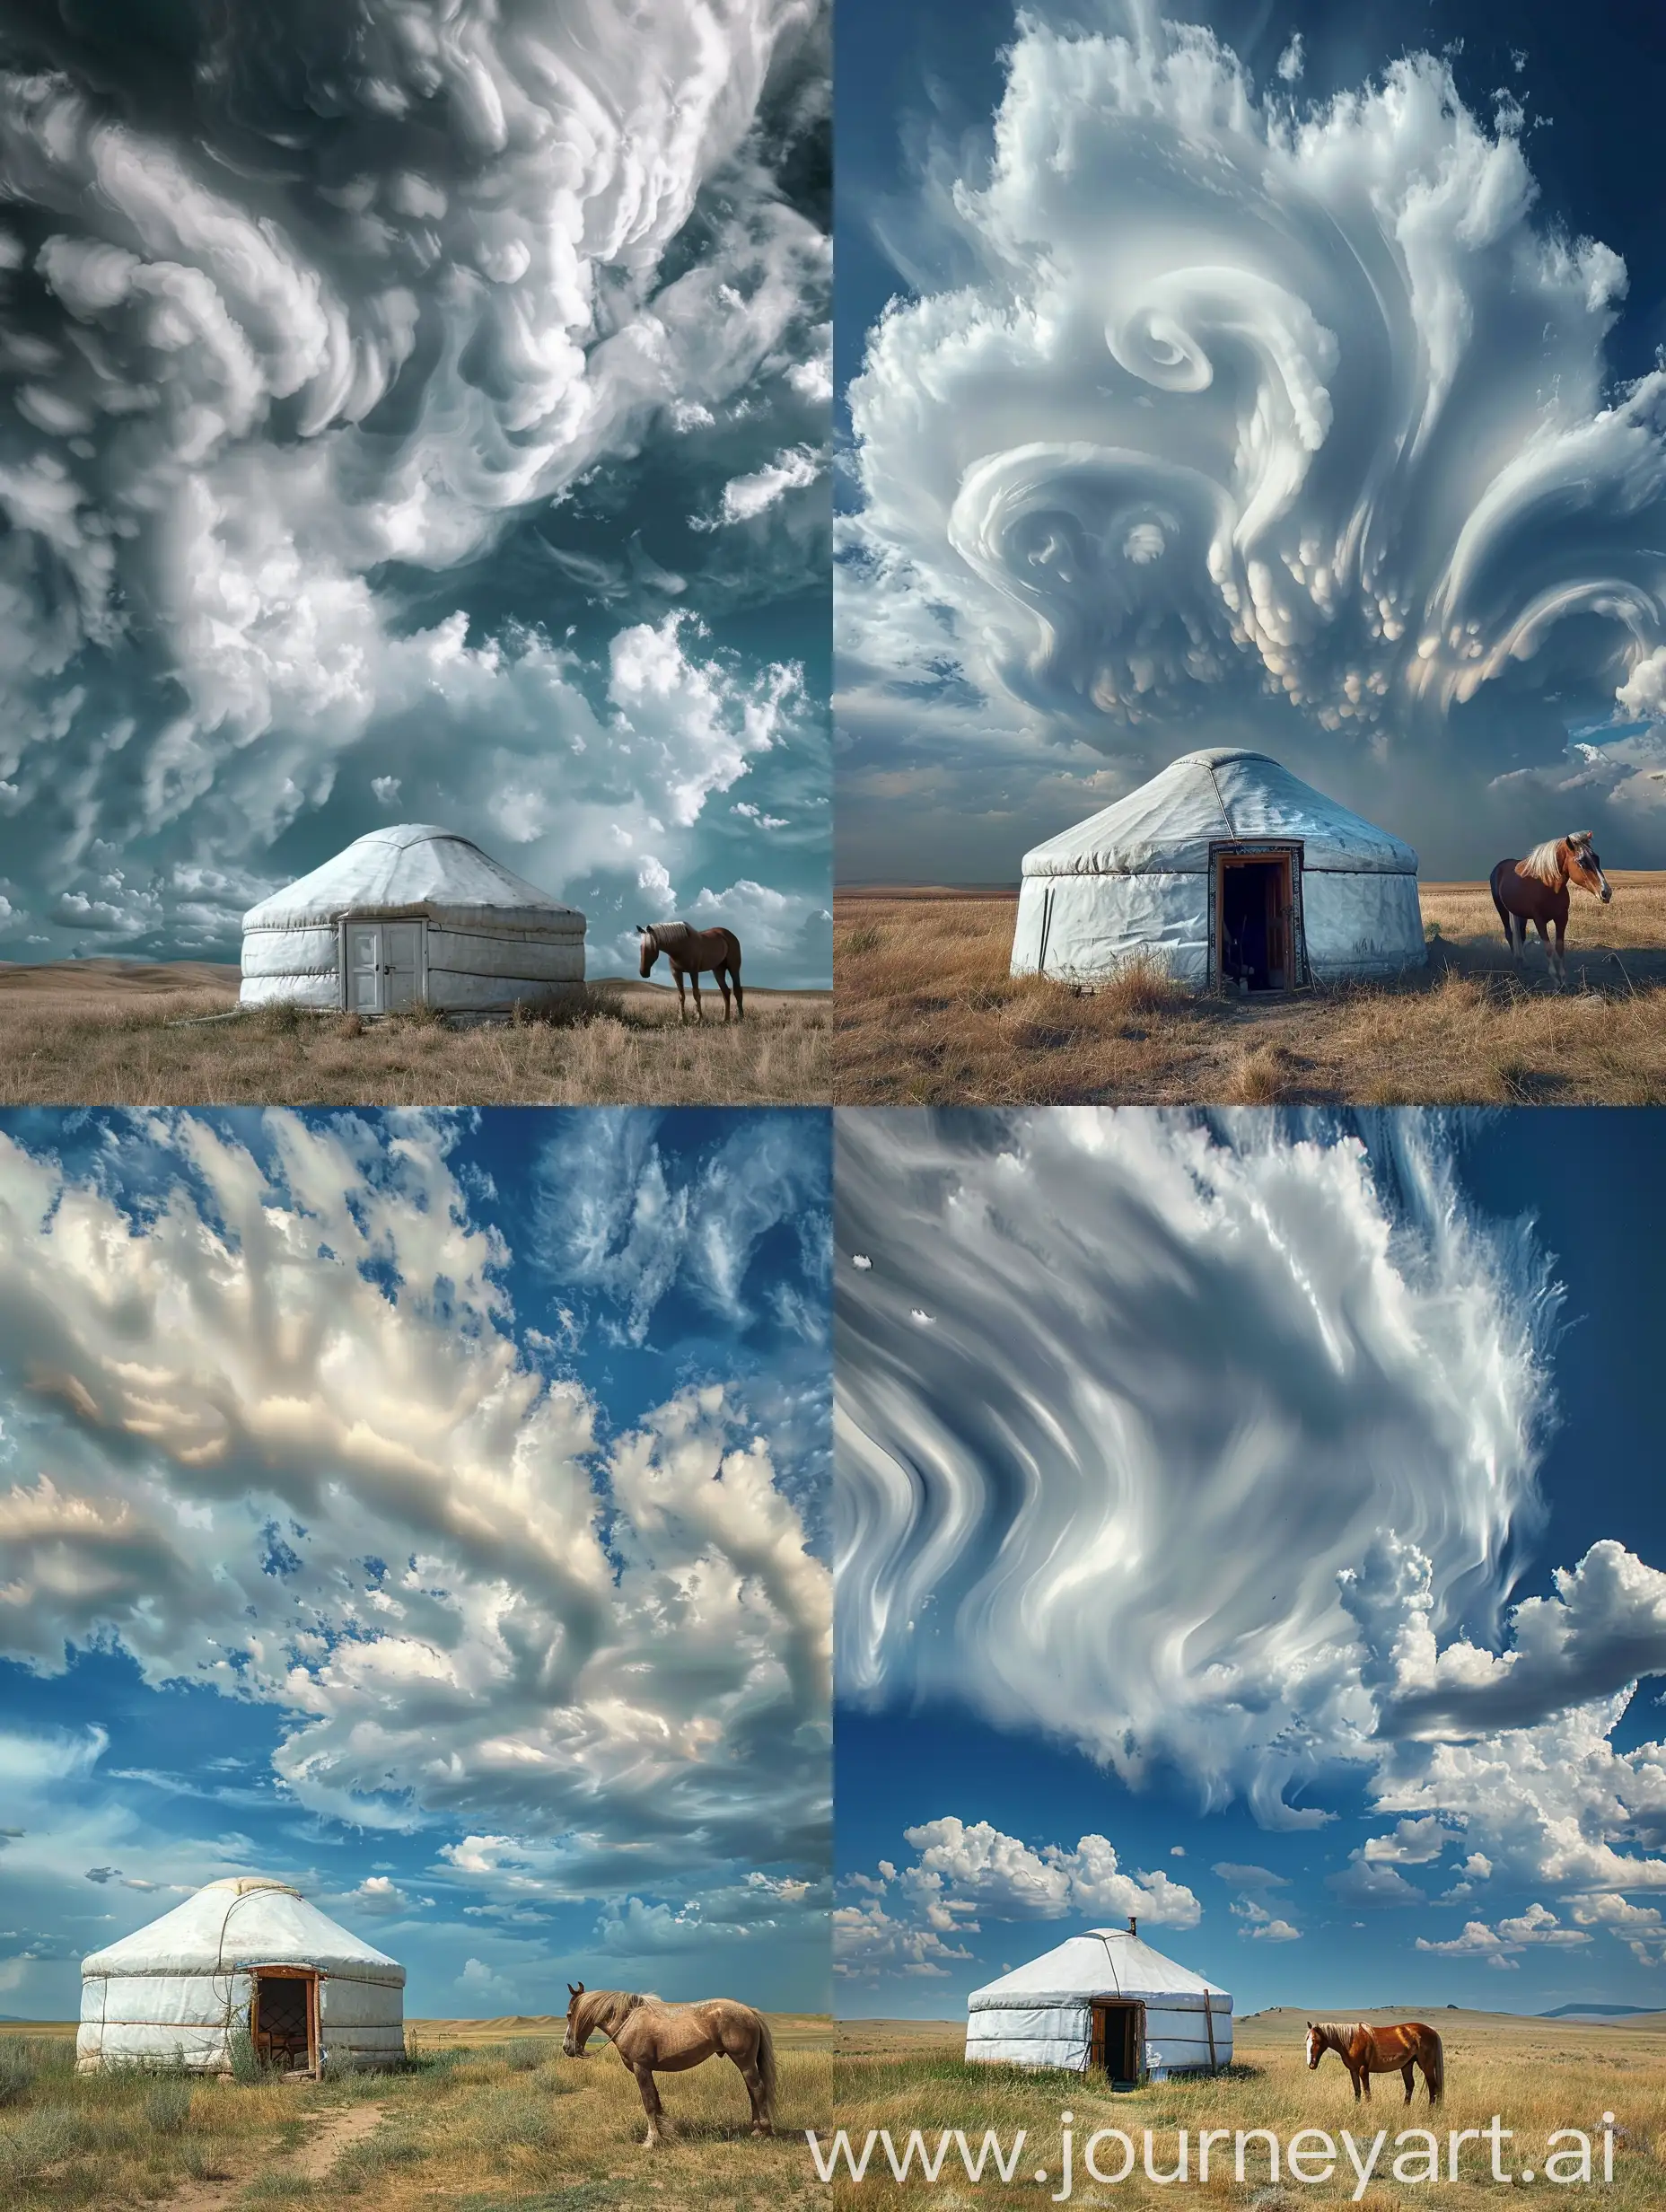 Traditional-Kazakh-Yurt-with-Twisted-Clouds-and-Horse-in-Steppe